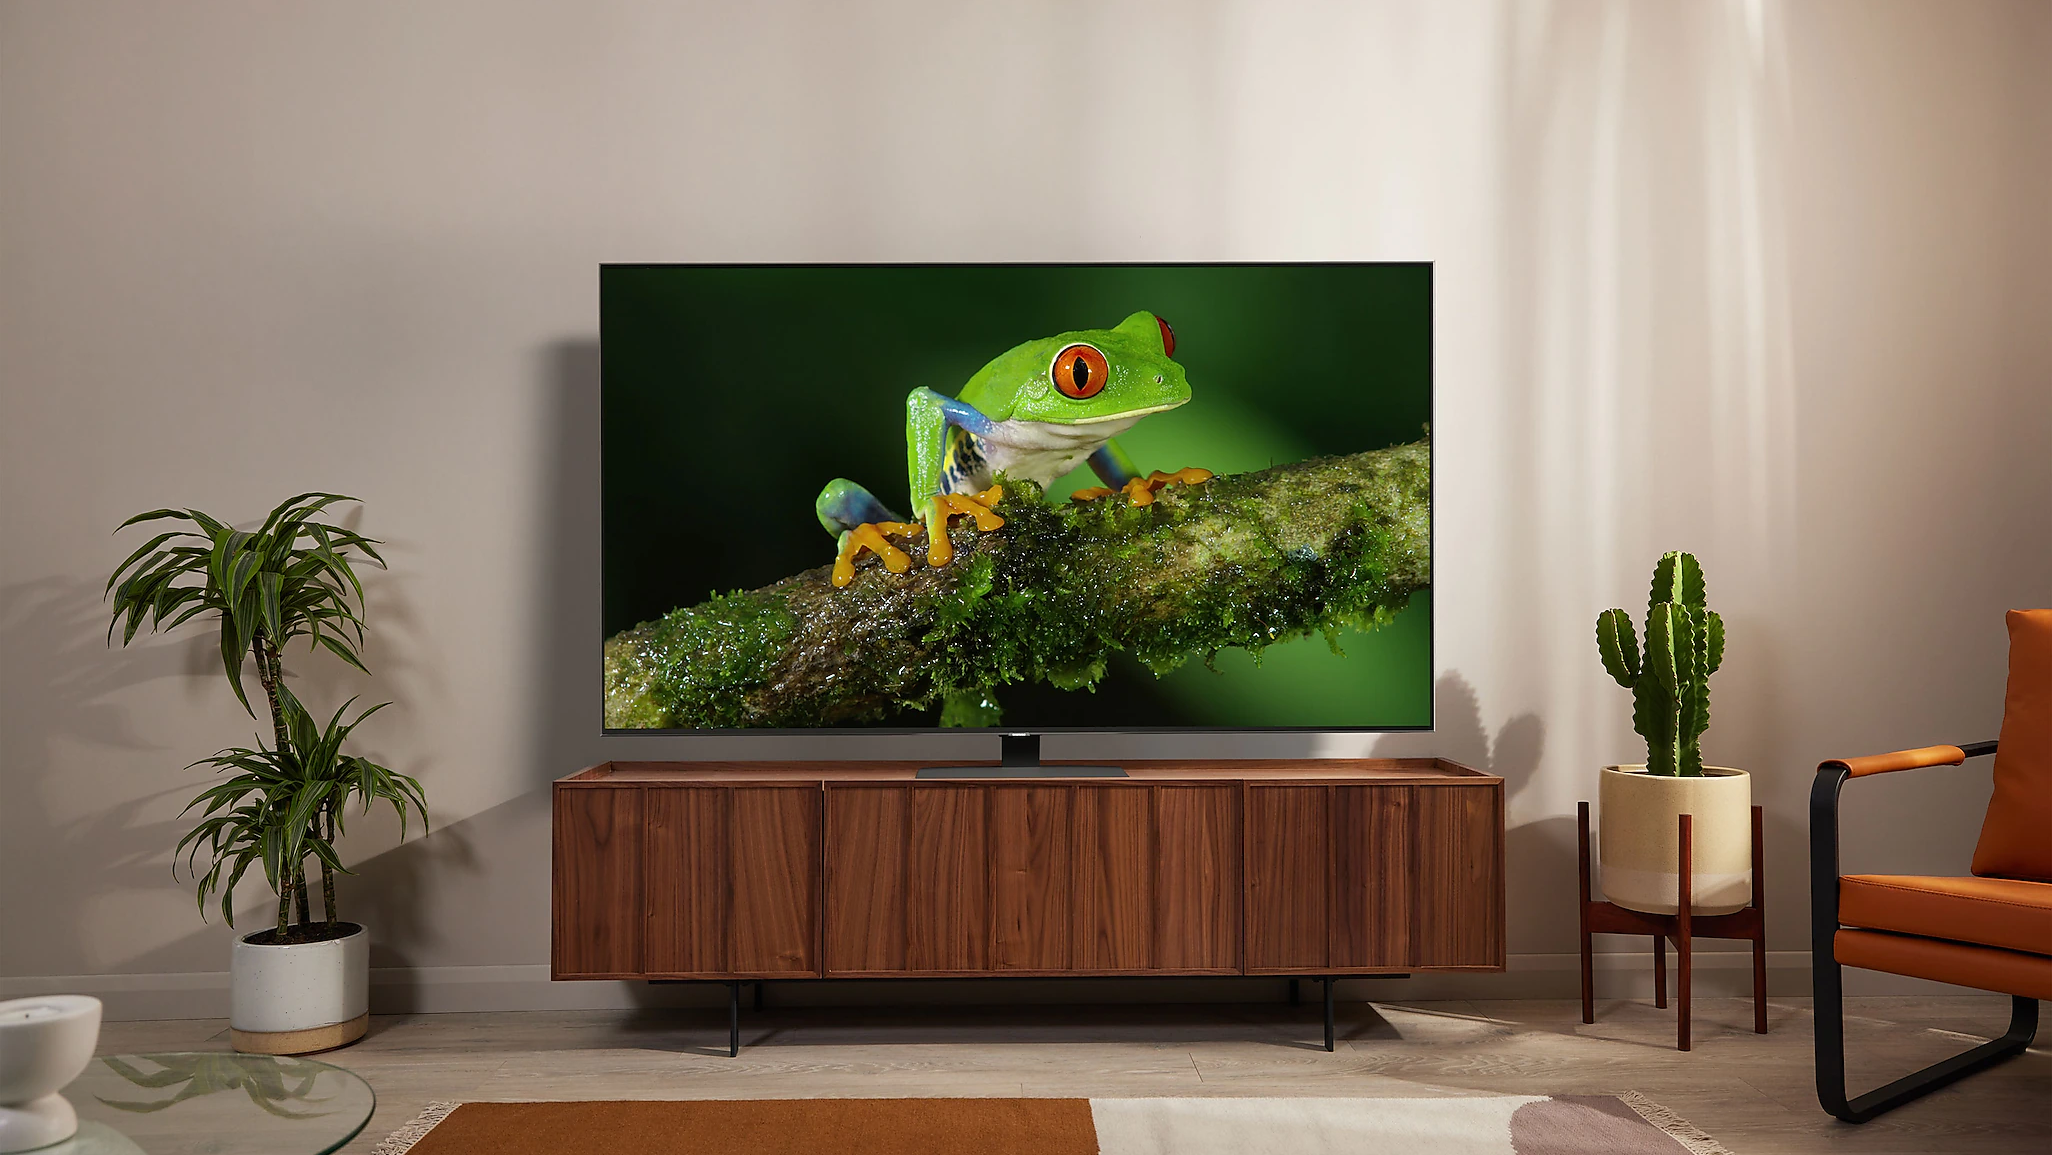 Forestående nål Glad Samsung Q80B QLED TV review: the sweet spot for price to performance? | T3